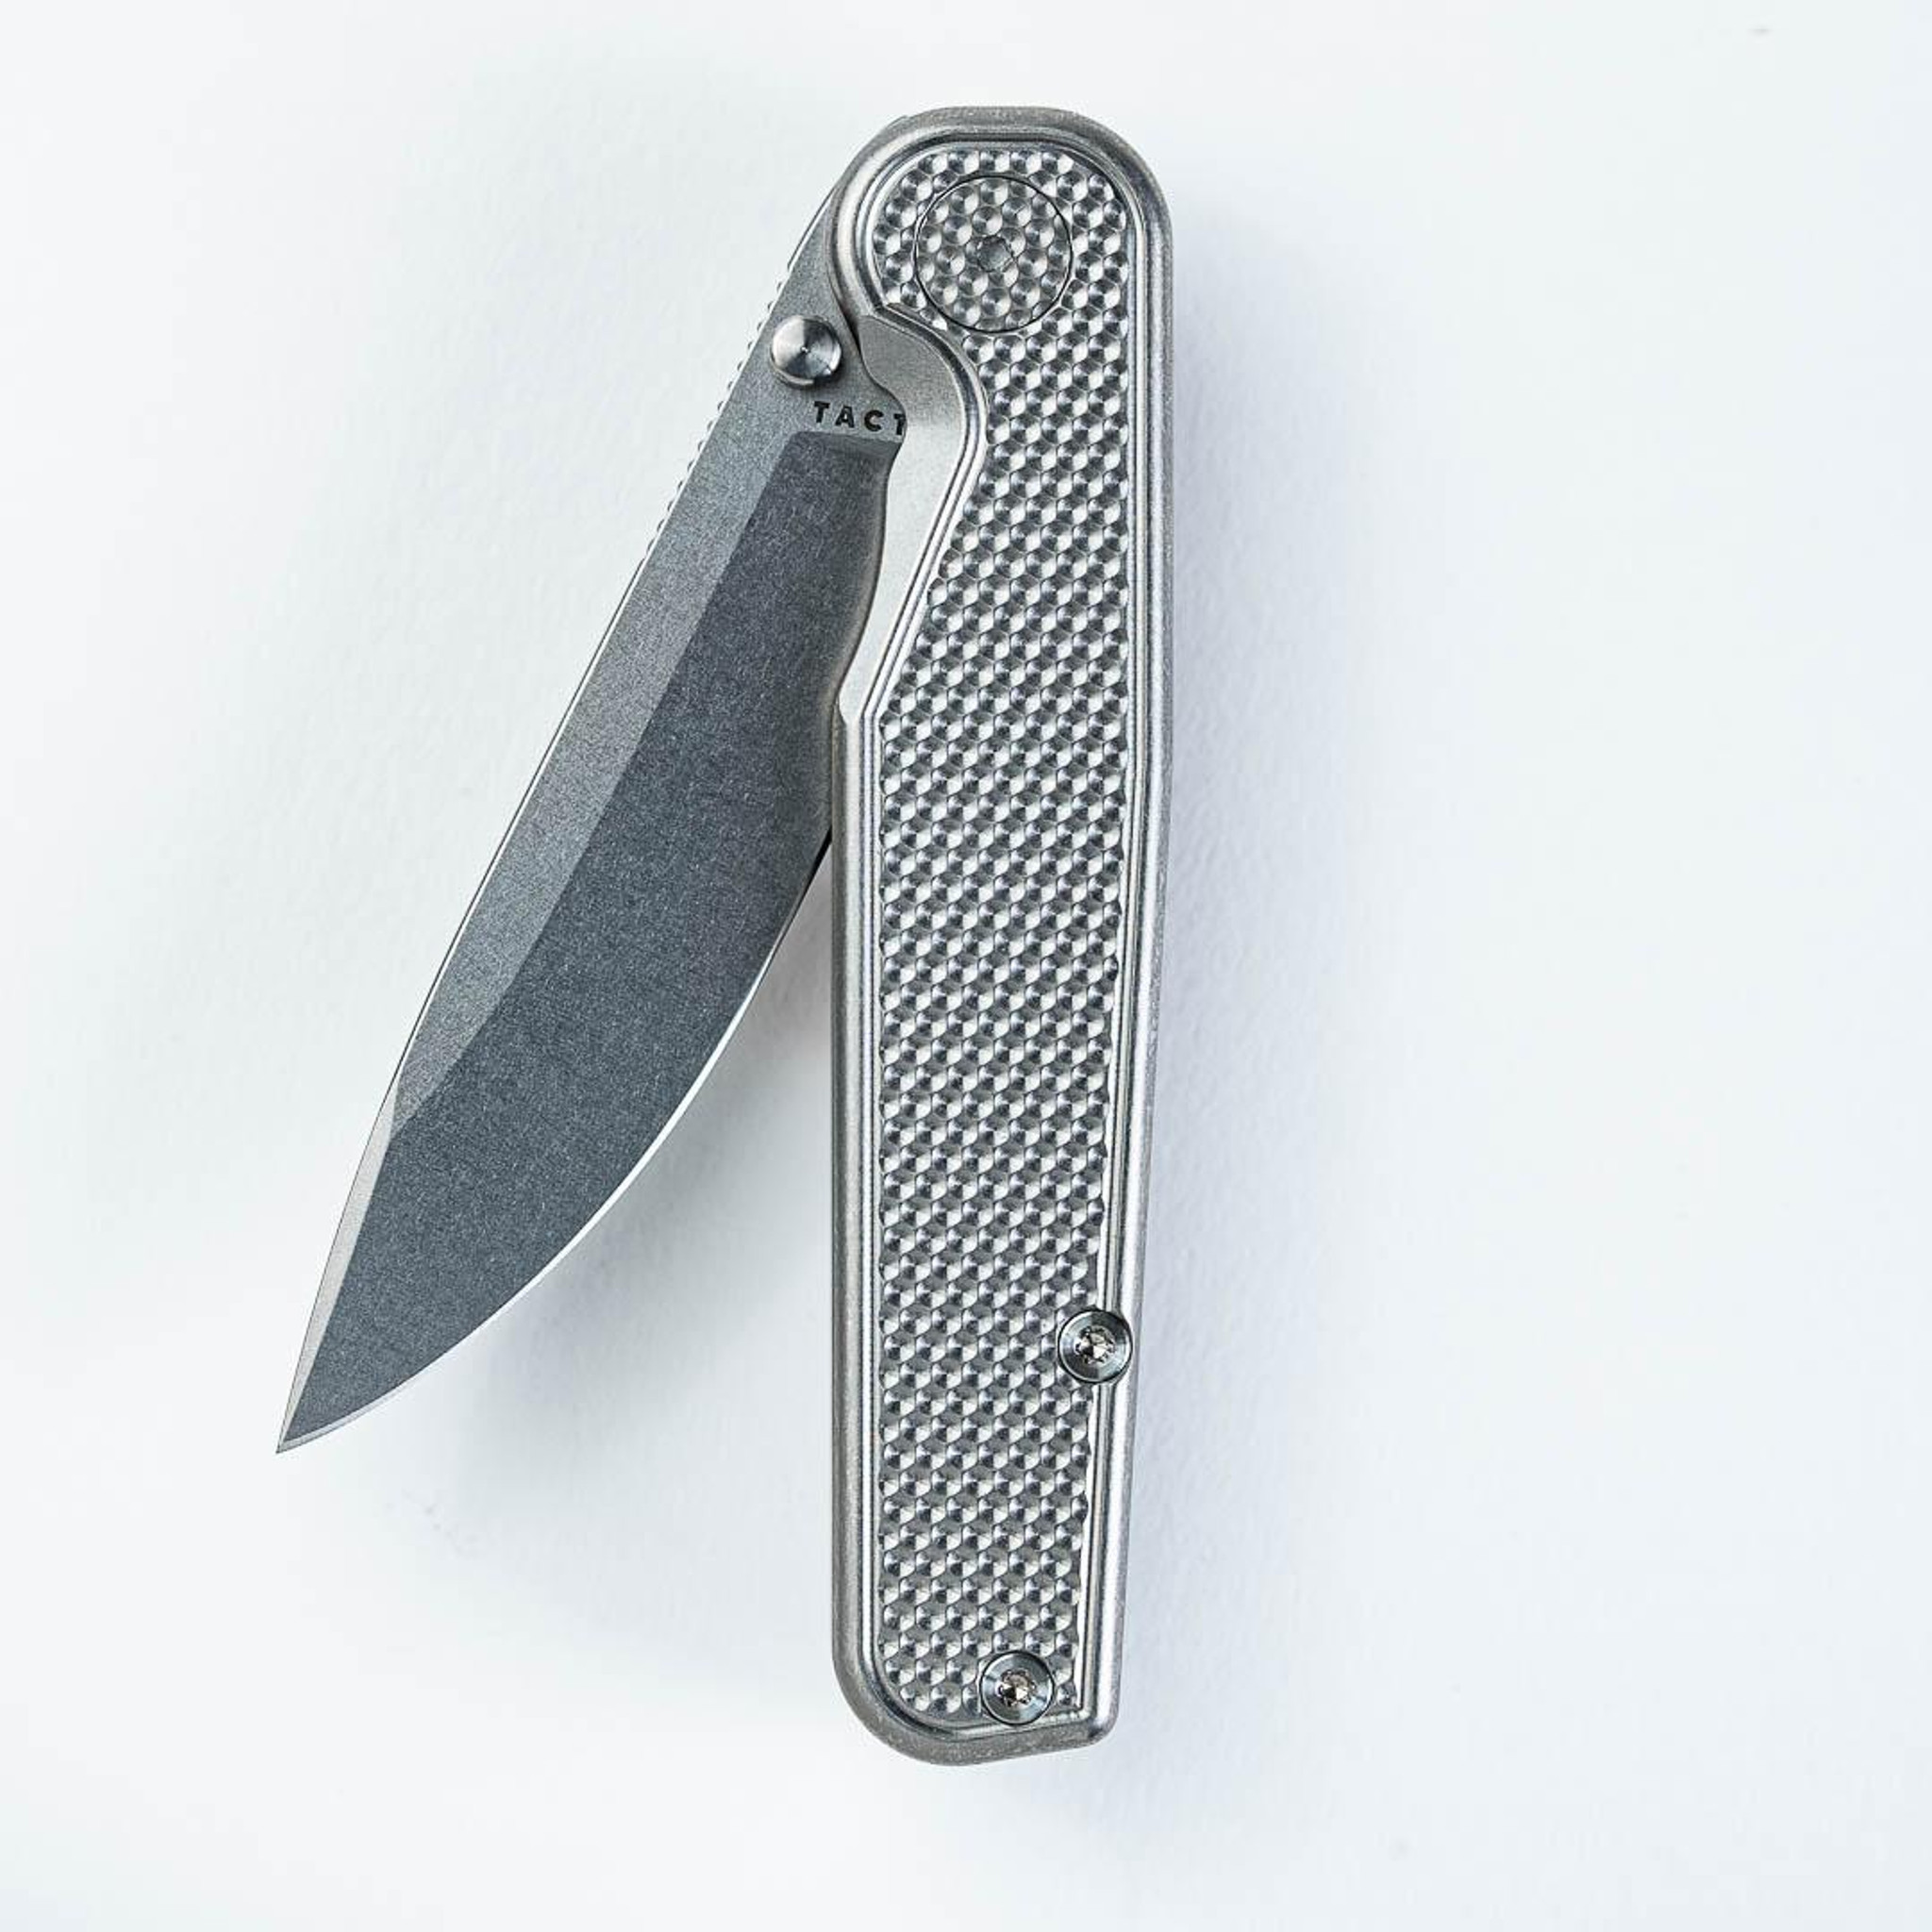 MagnaCut Knife Steel: The Complete Guide